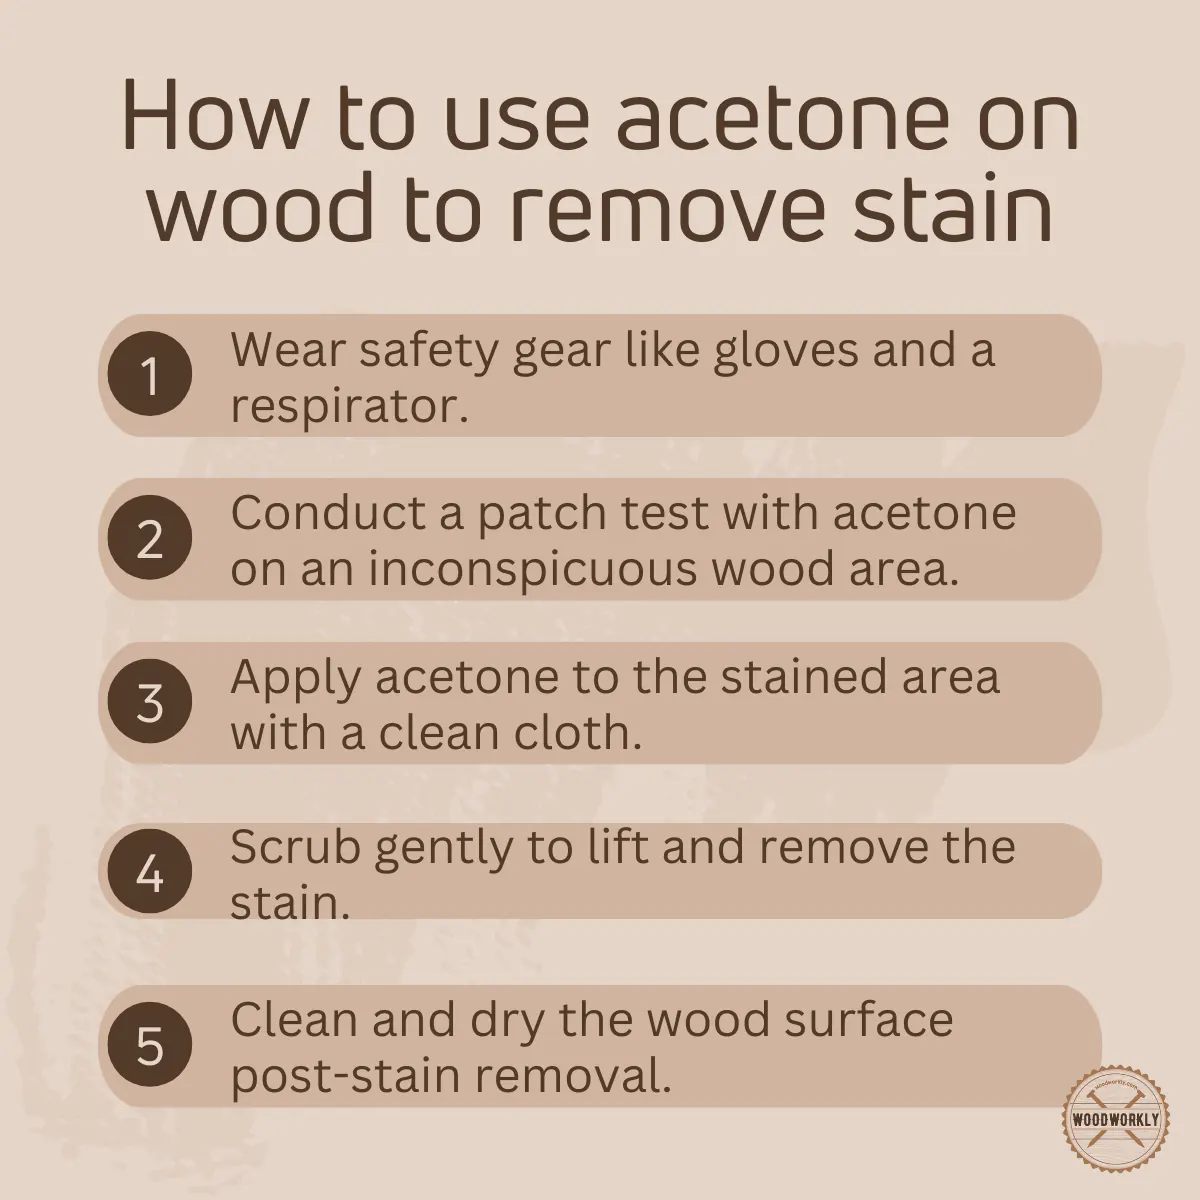 How to use acetone on wood to remove stain